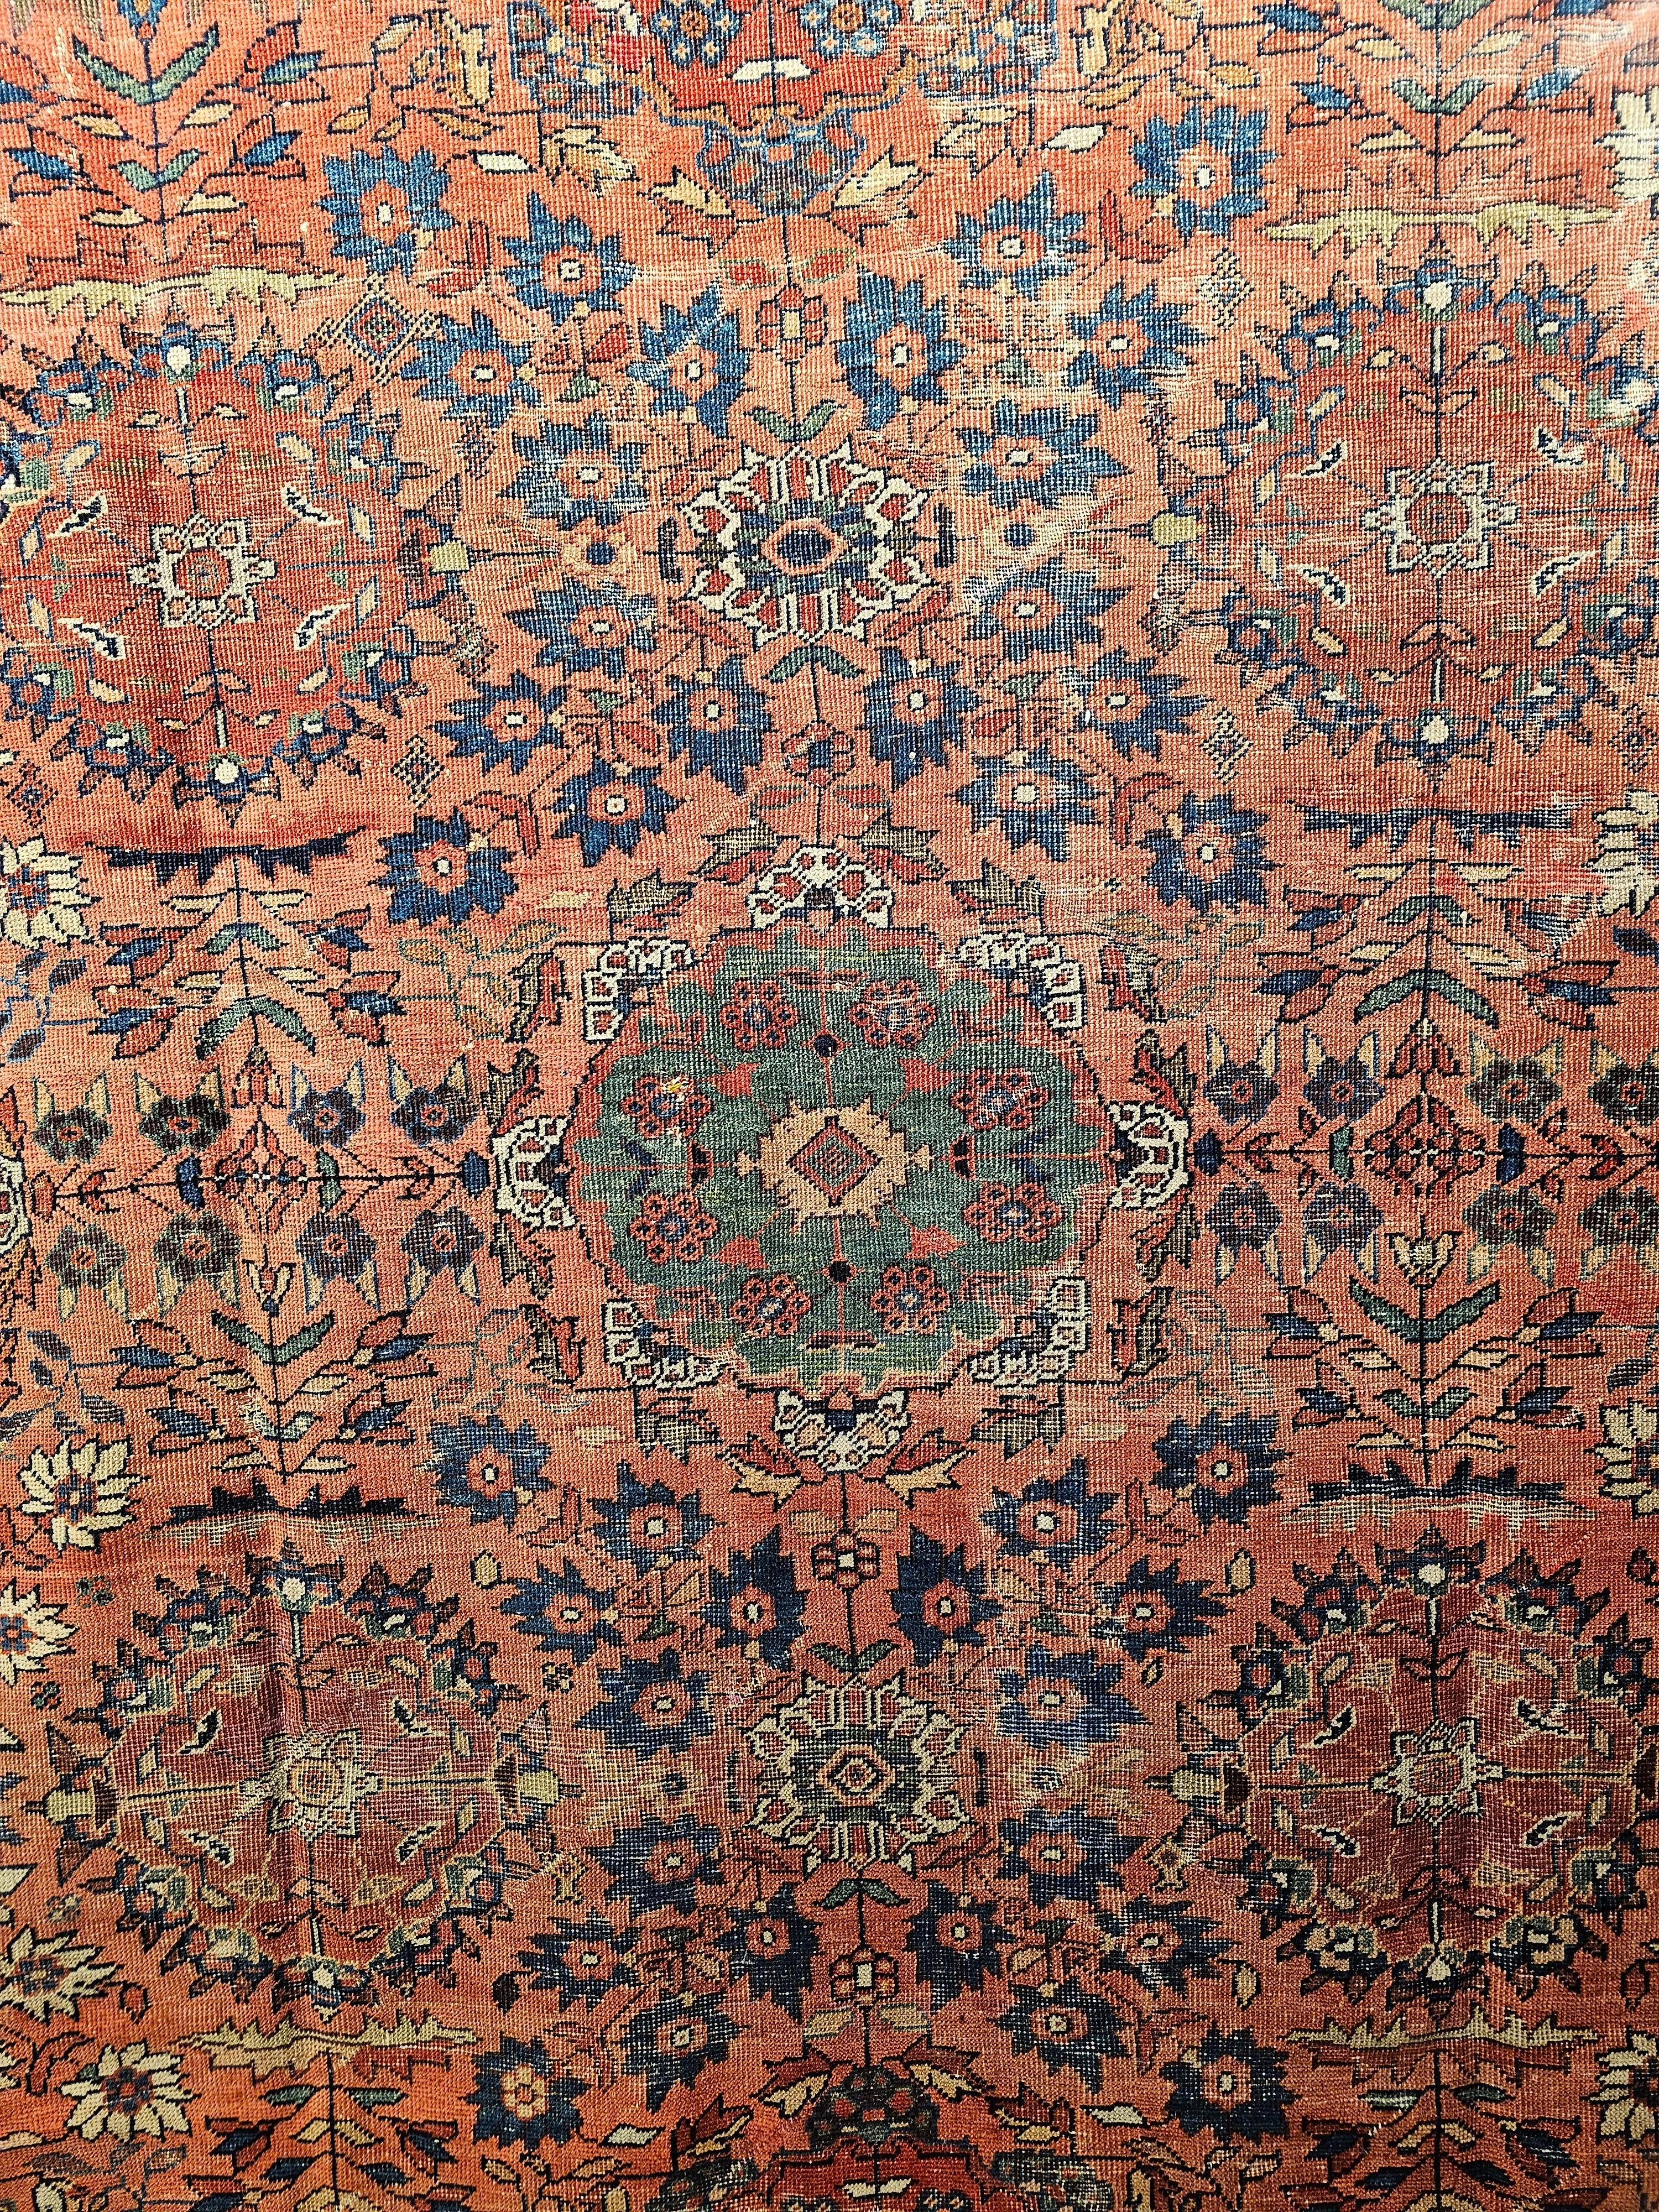 Late 19th Century Vintage Persian Mahal Sultanabad Room Size Rug in Brick Red, Navy Blue